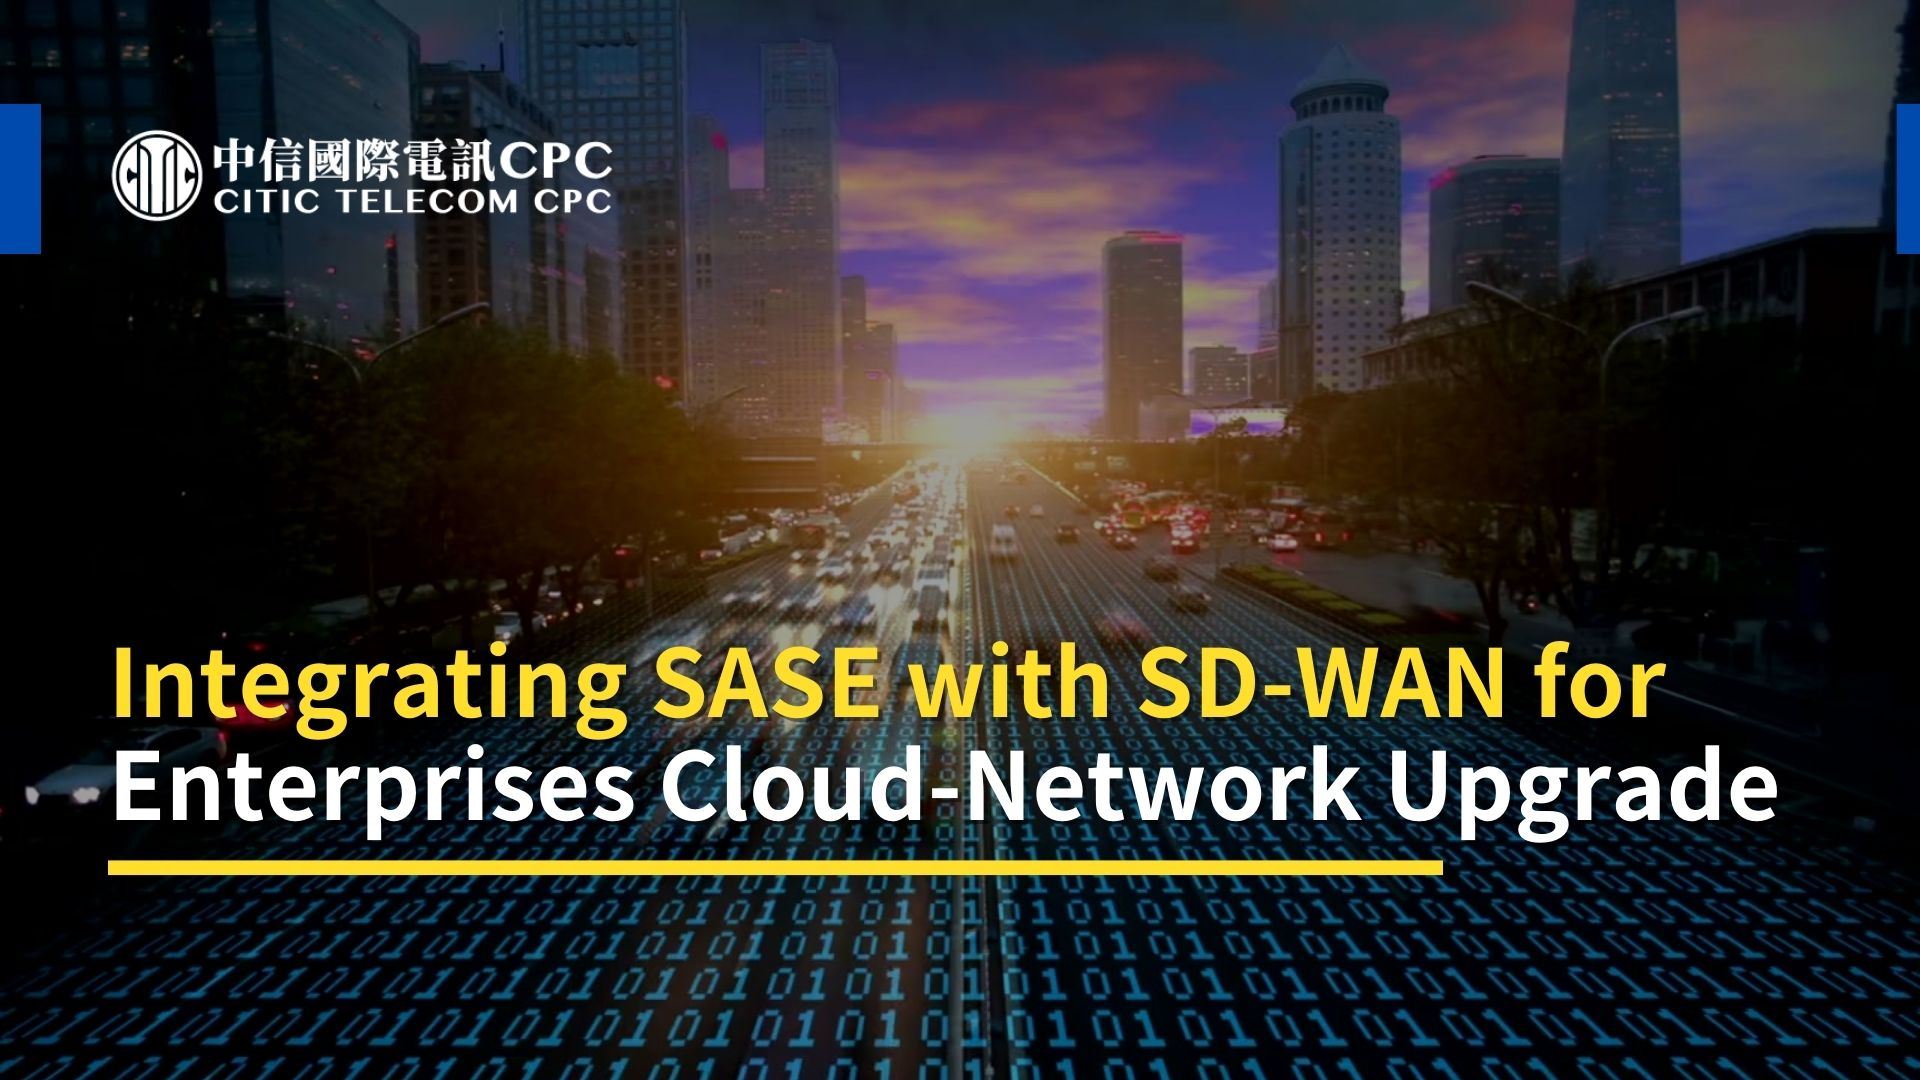 Integrating SASE with SD-WAN for Enterprises Cloud-Network Upgrade